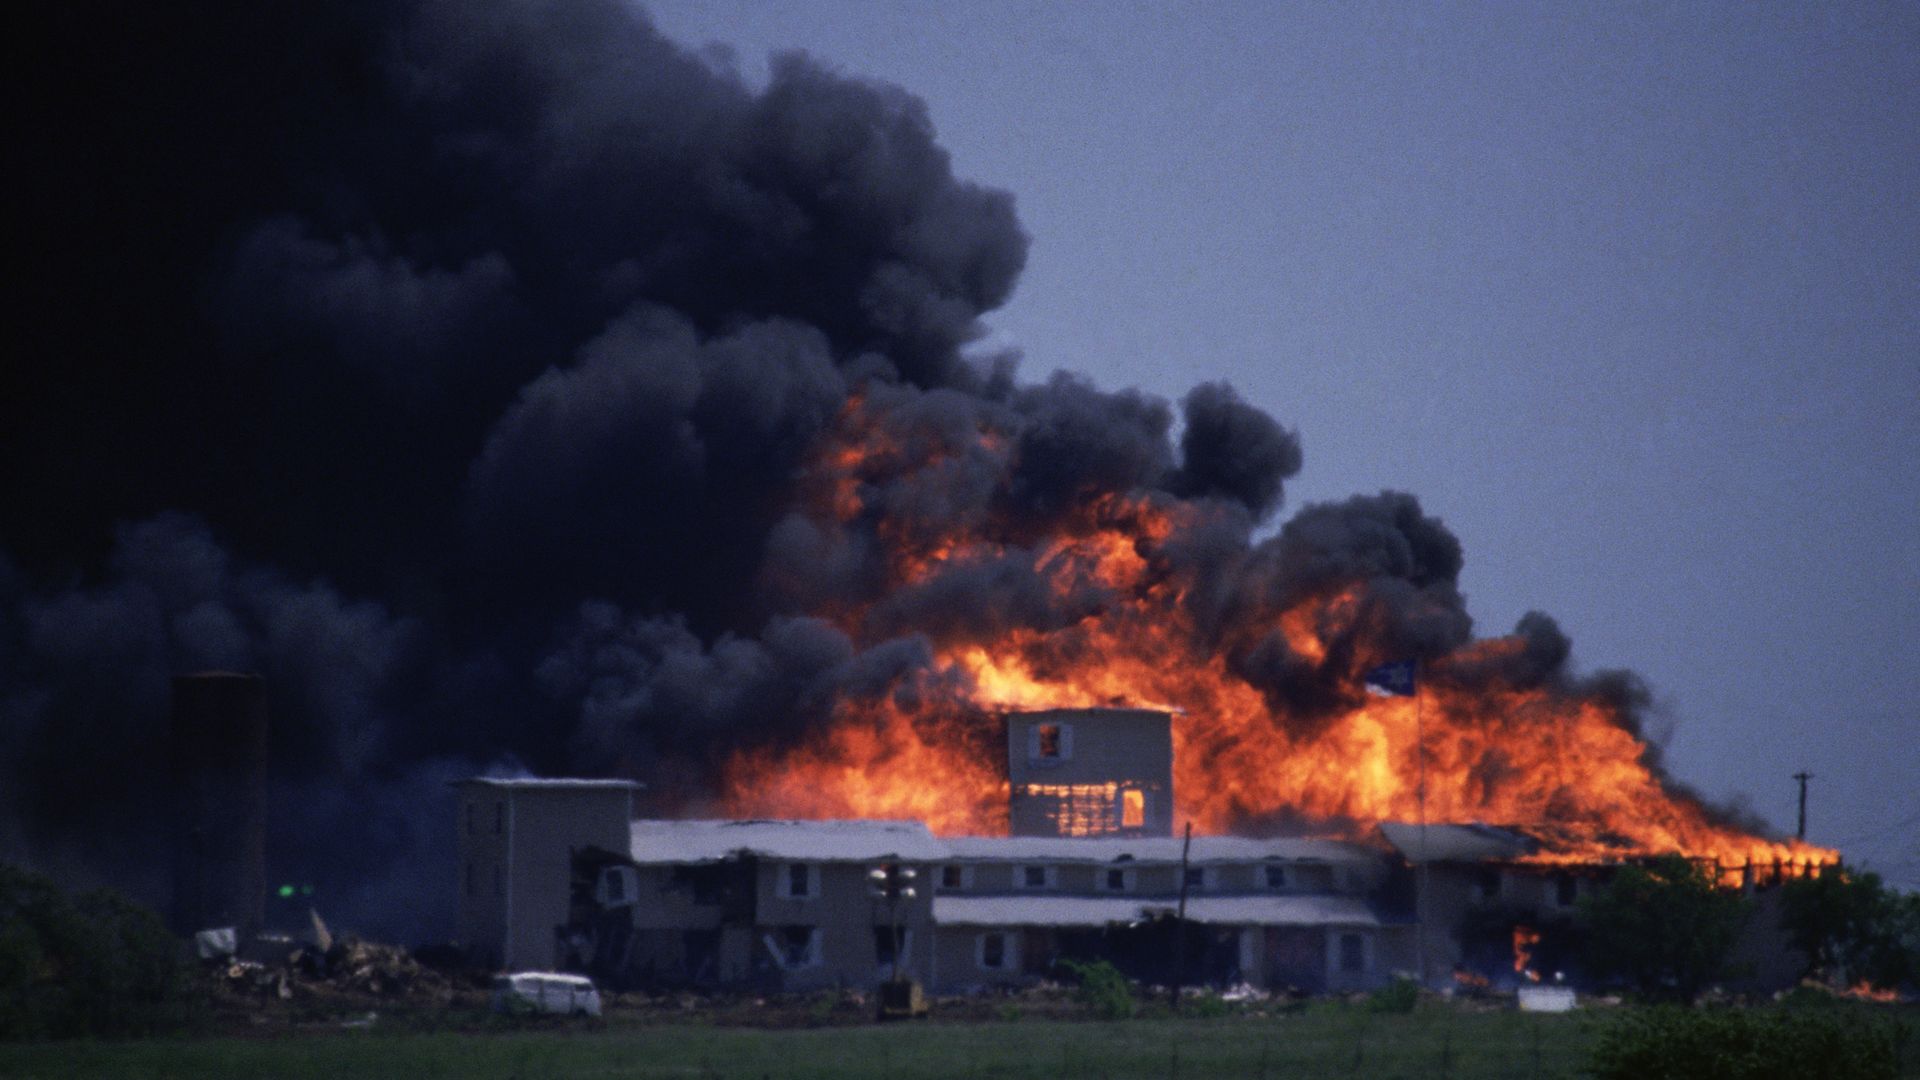 The Branch Davidian ranch on fire